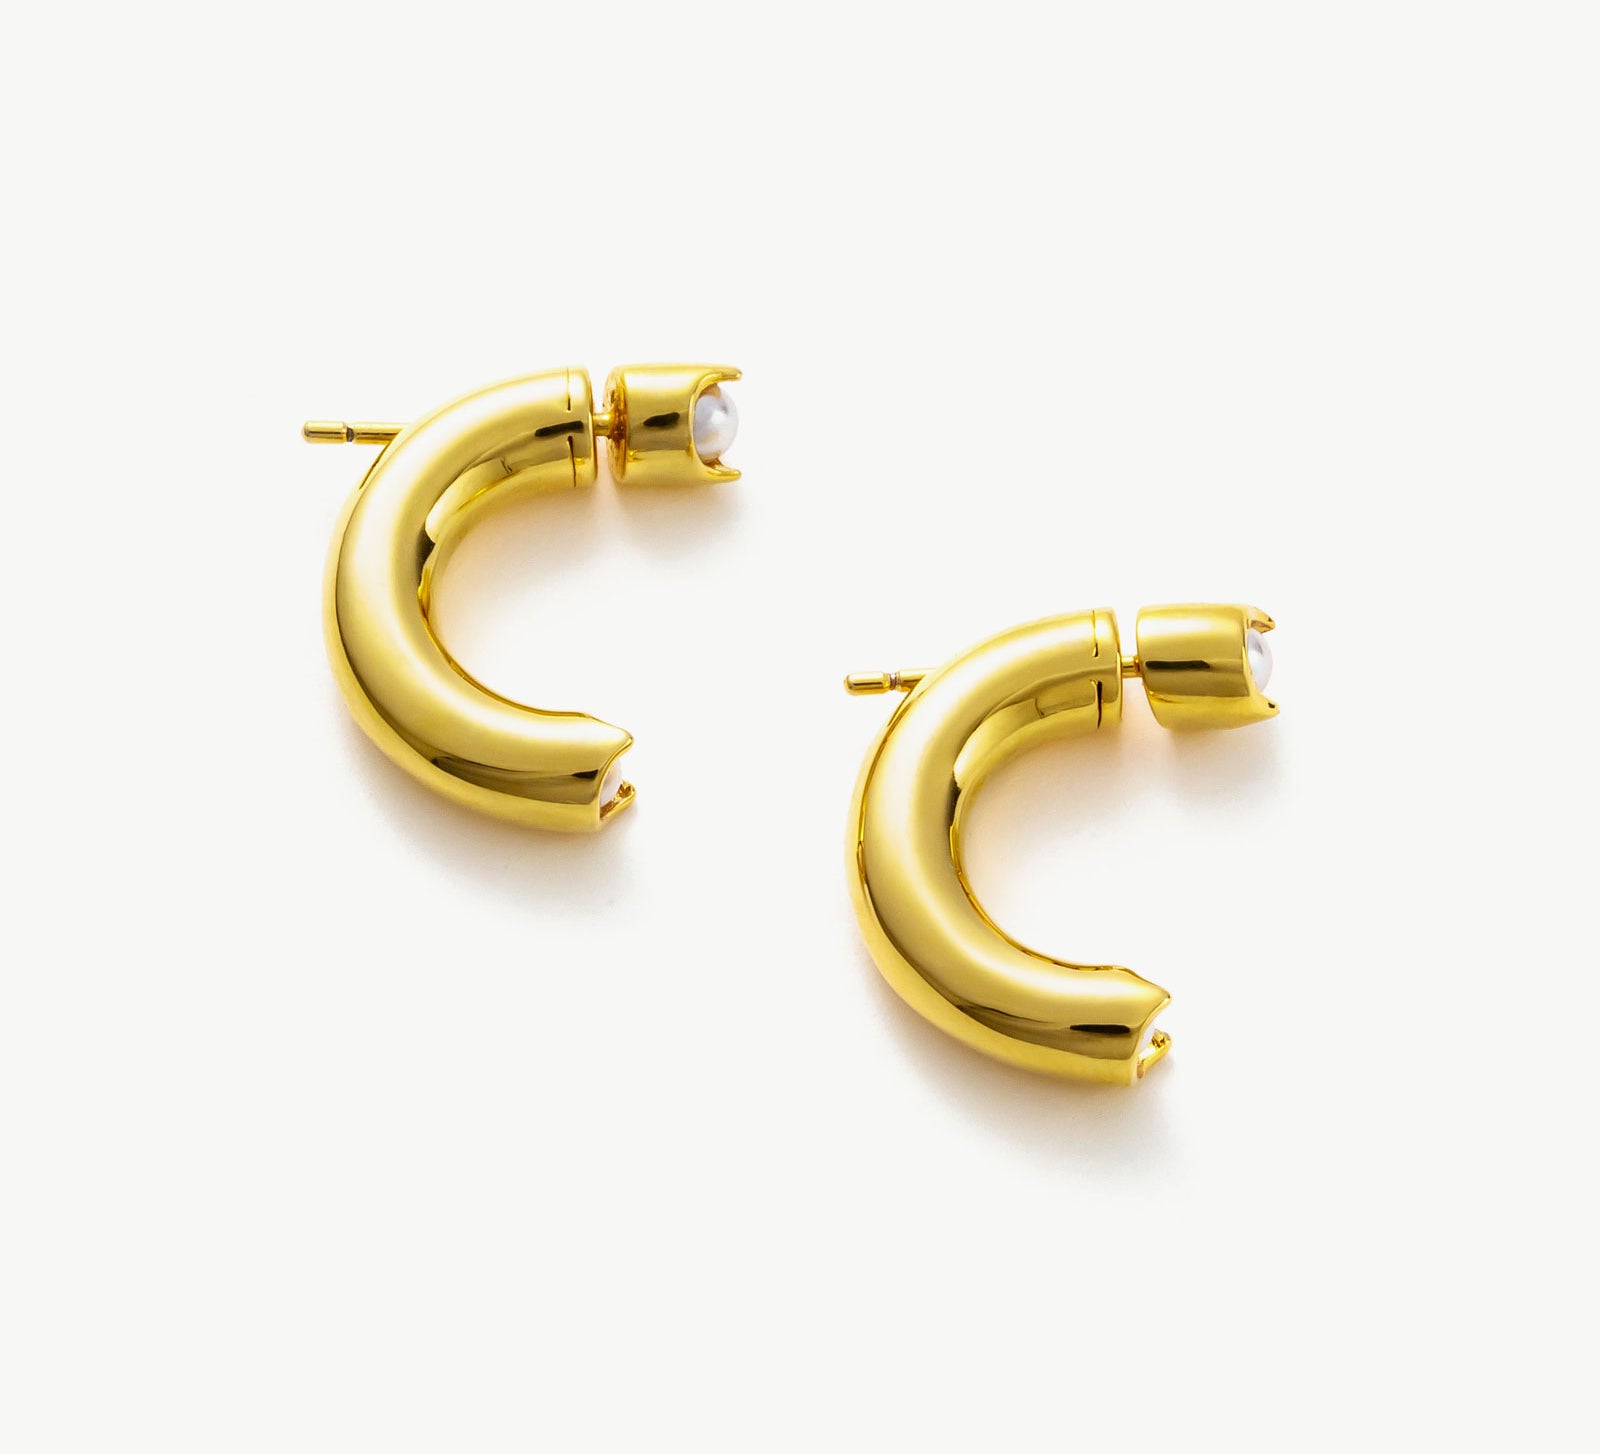 Mini Hoop Earrings in Gold, a radiant and dainty accessory that adds a touch of warmth and sophistication to your ear ensemble